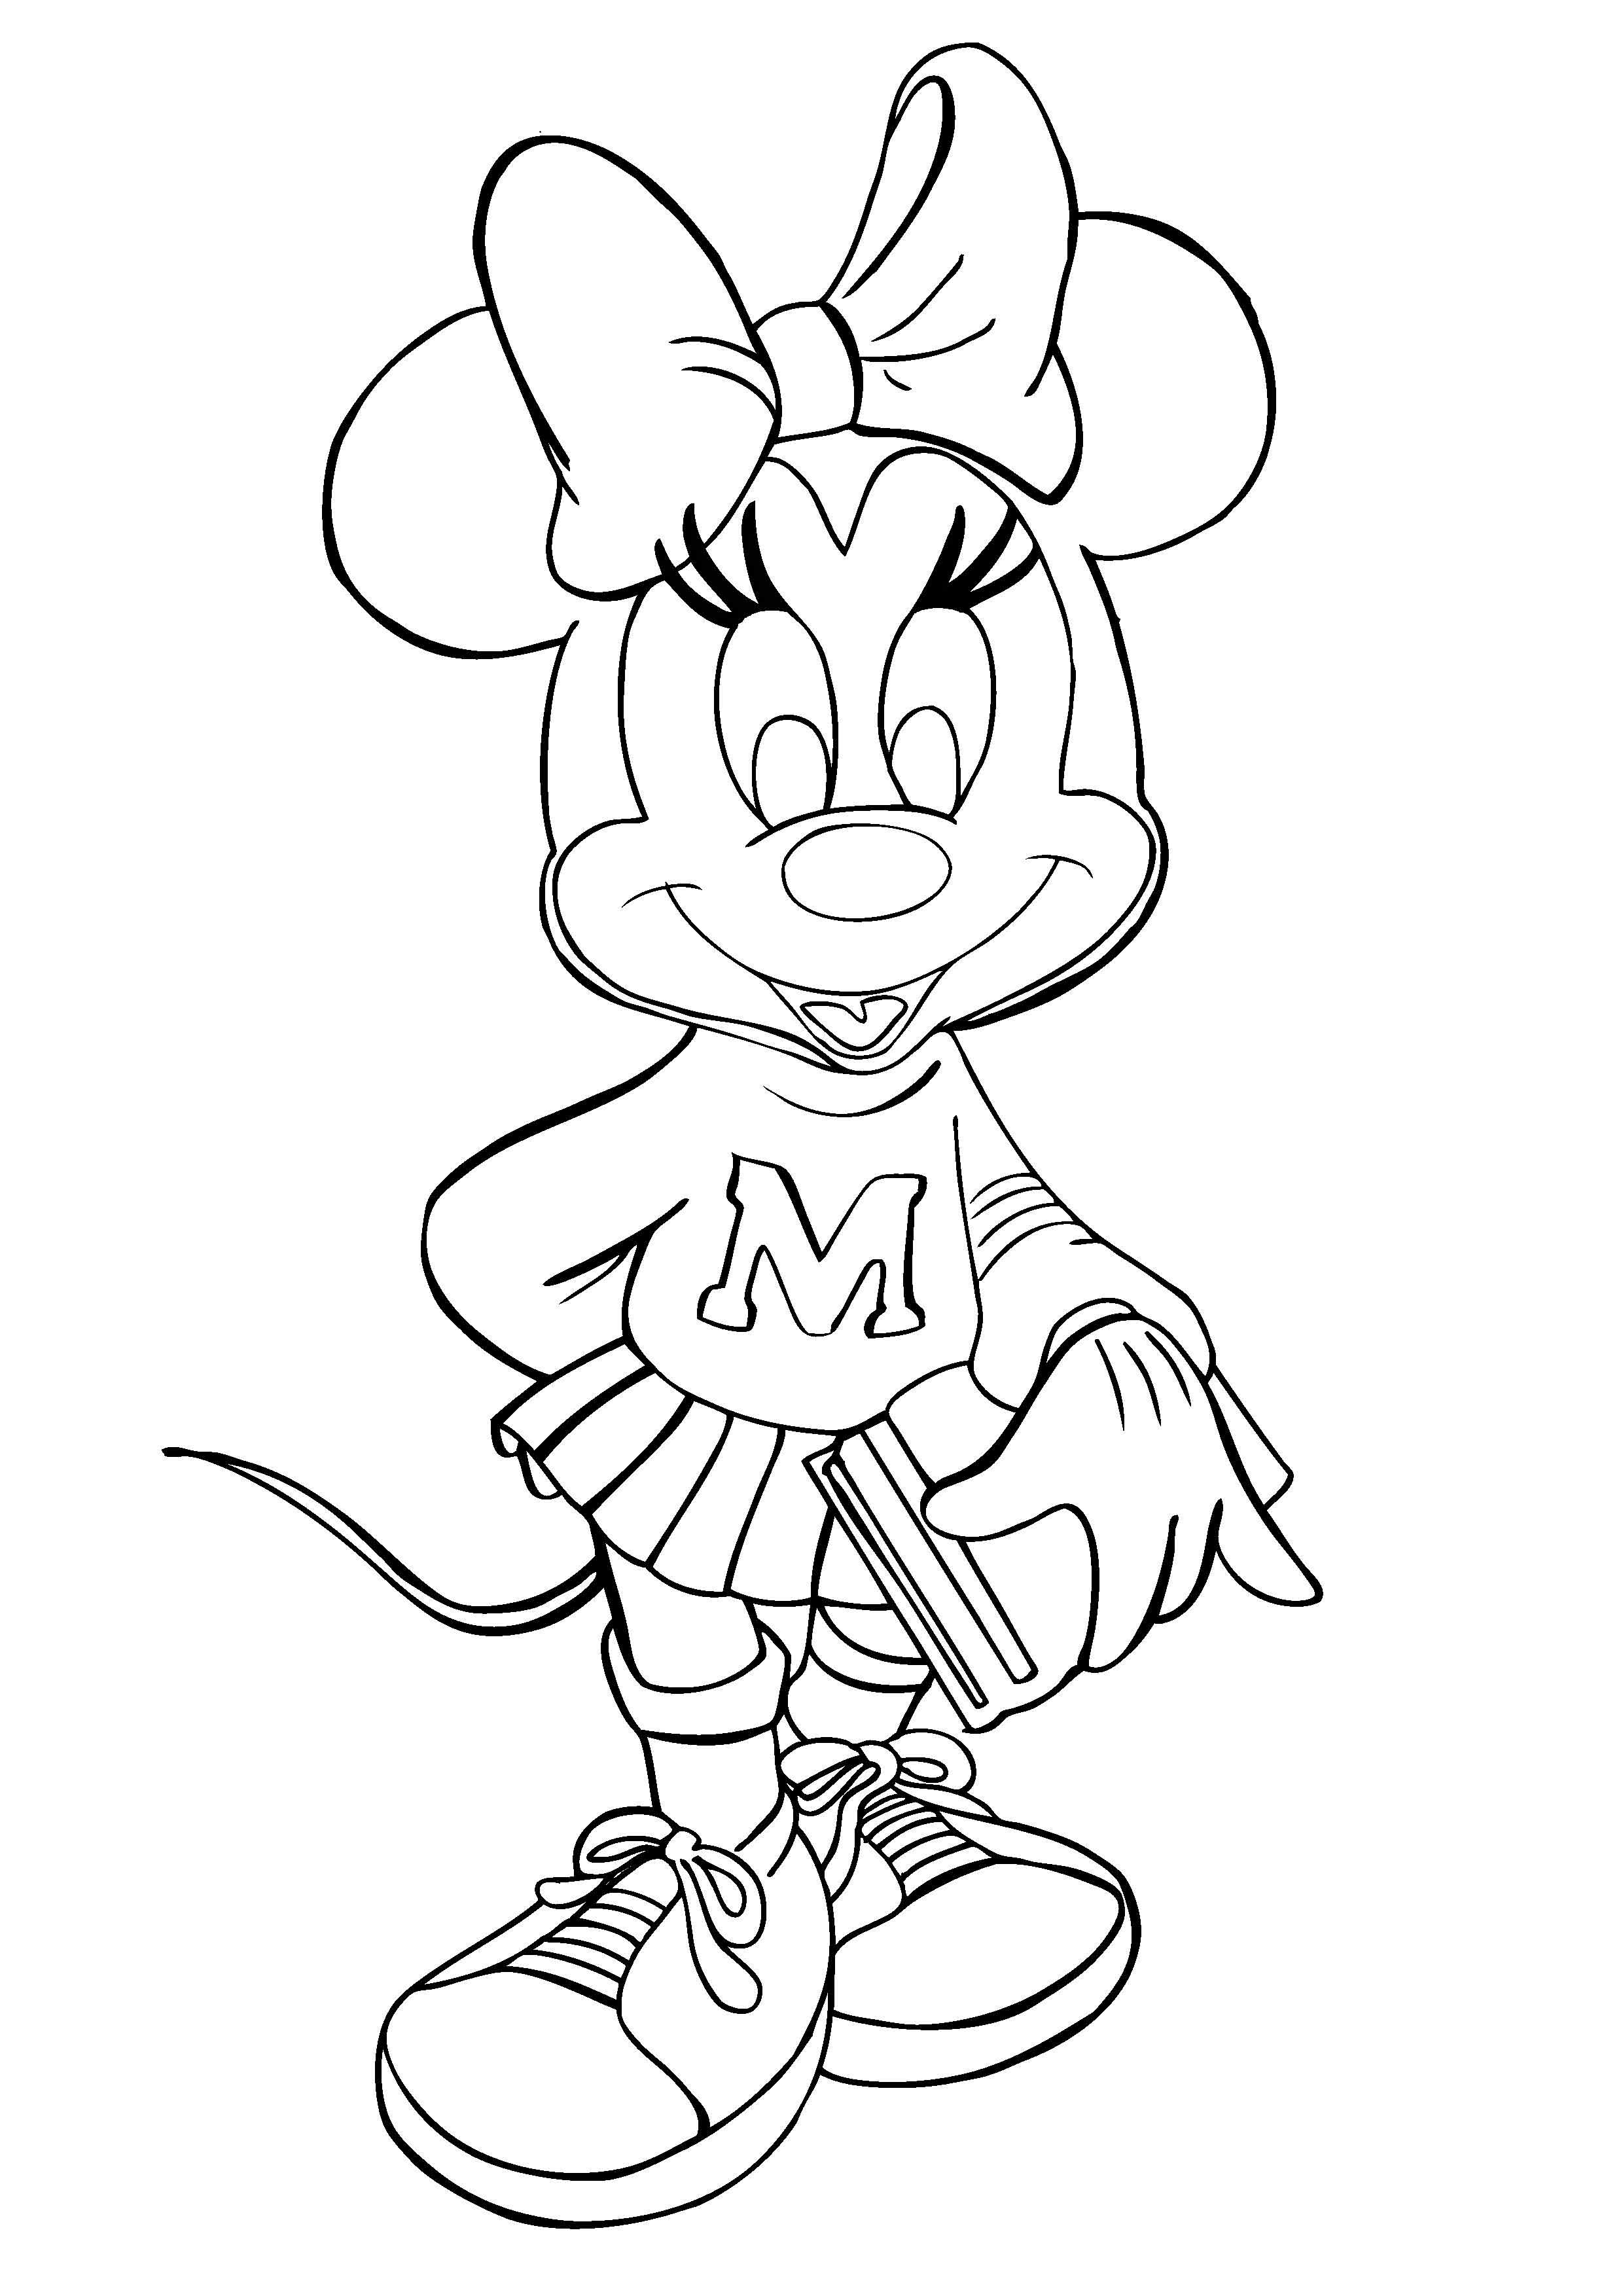  Minnie Mouse Coloring pages | Disney coloring pages | #20